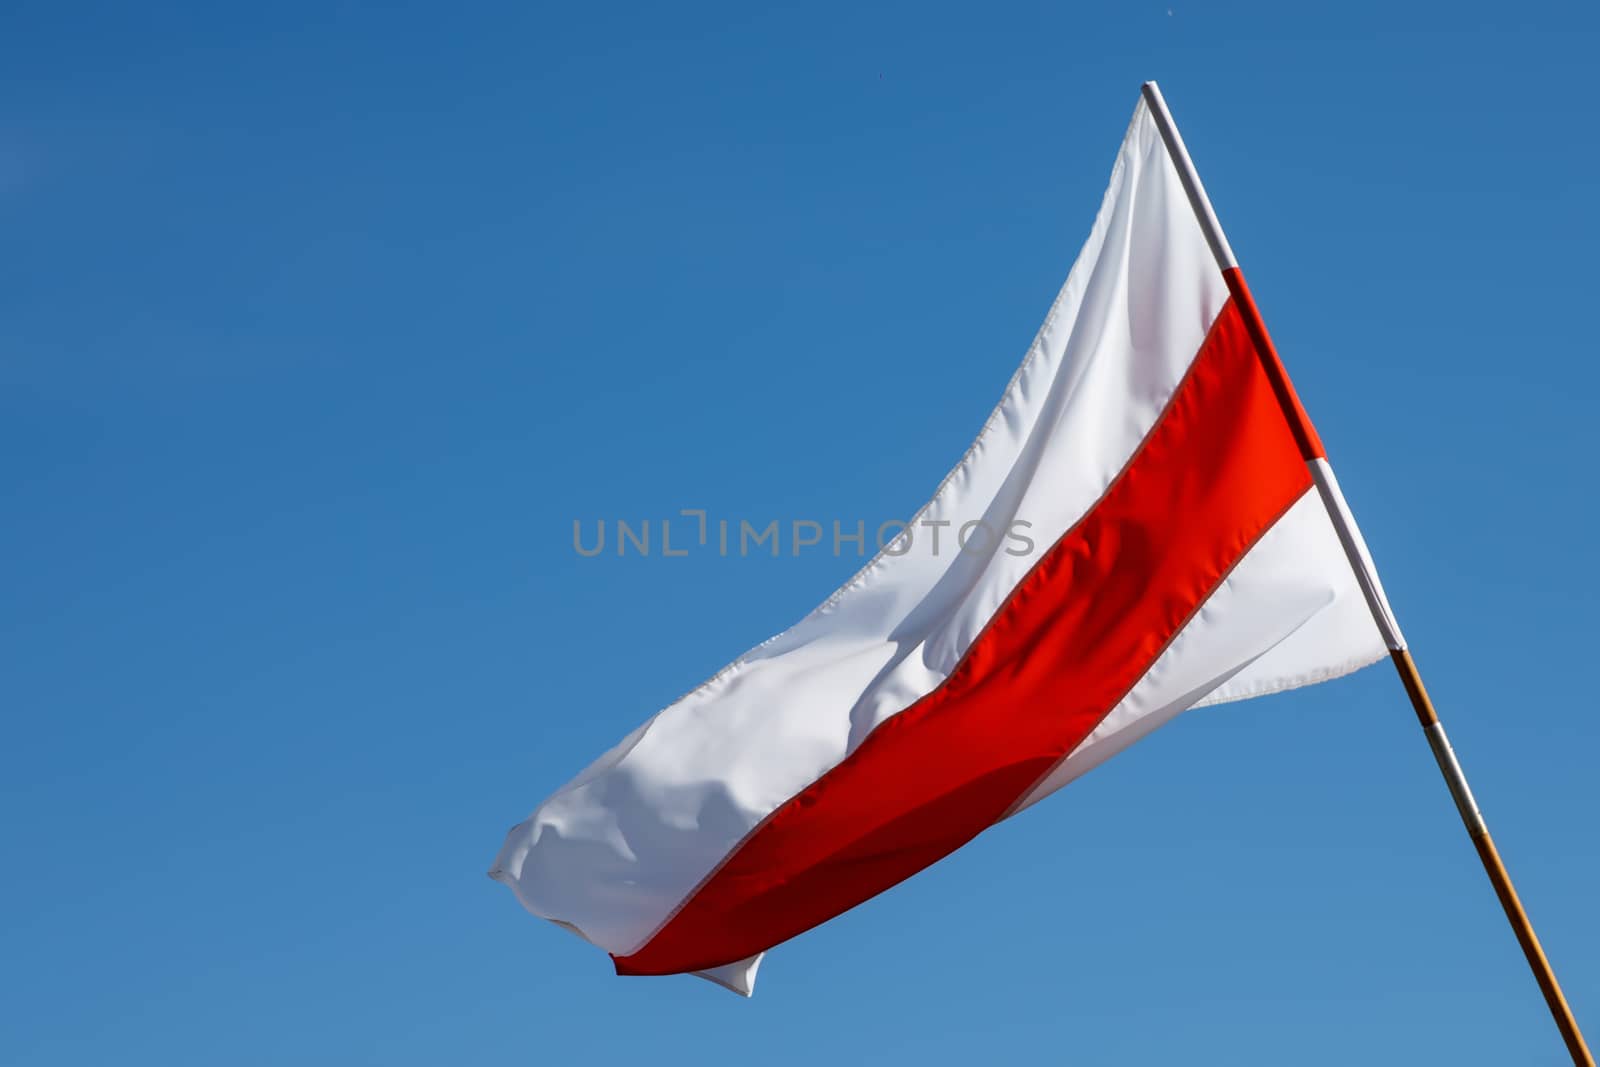 New Belarus white-red-white flag. Protest and historical authentic flag by 9parusnikov